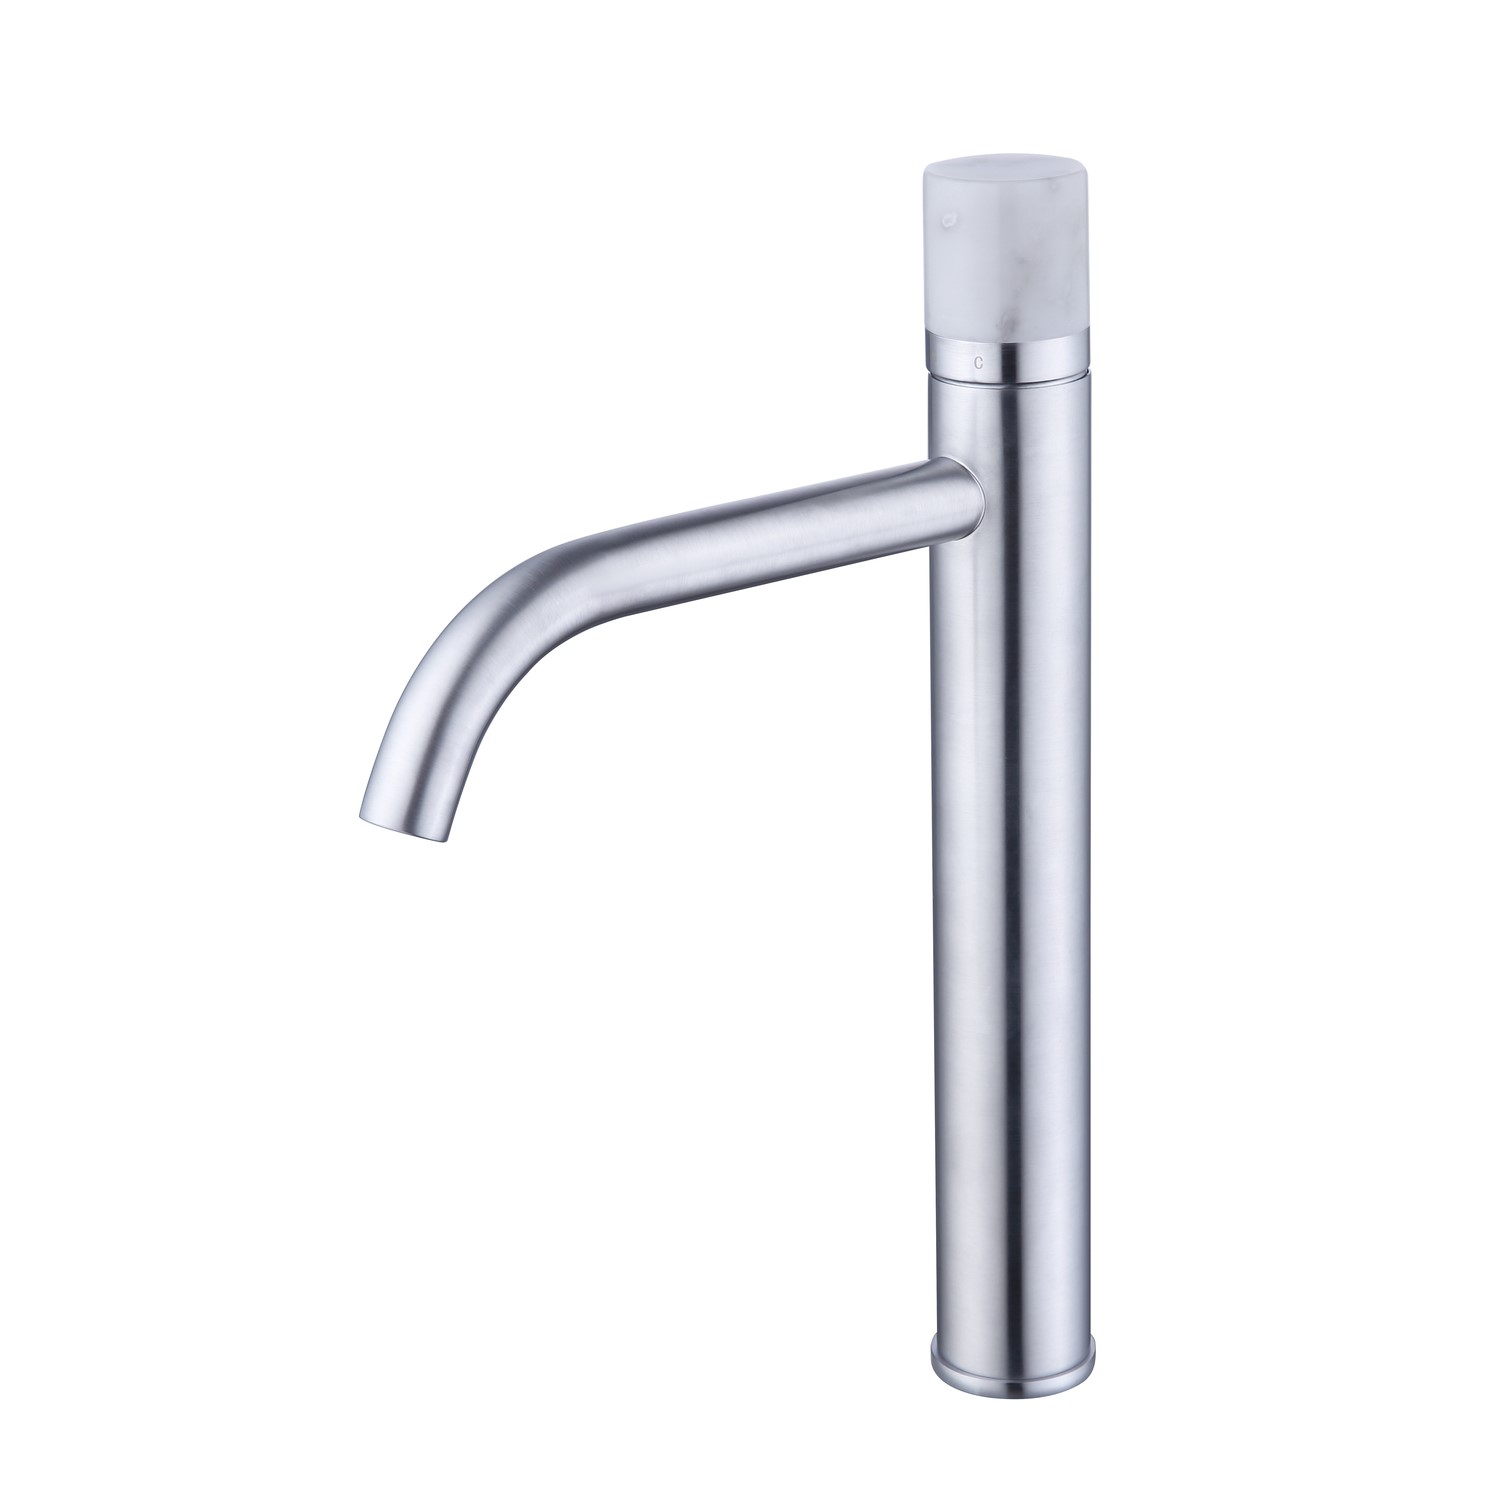 Tall Chrome Mono Basin Mixer Tap with Marble Handle - Lorano